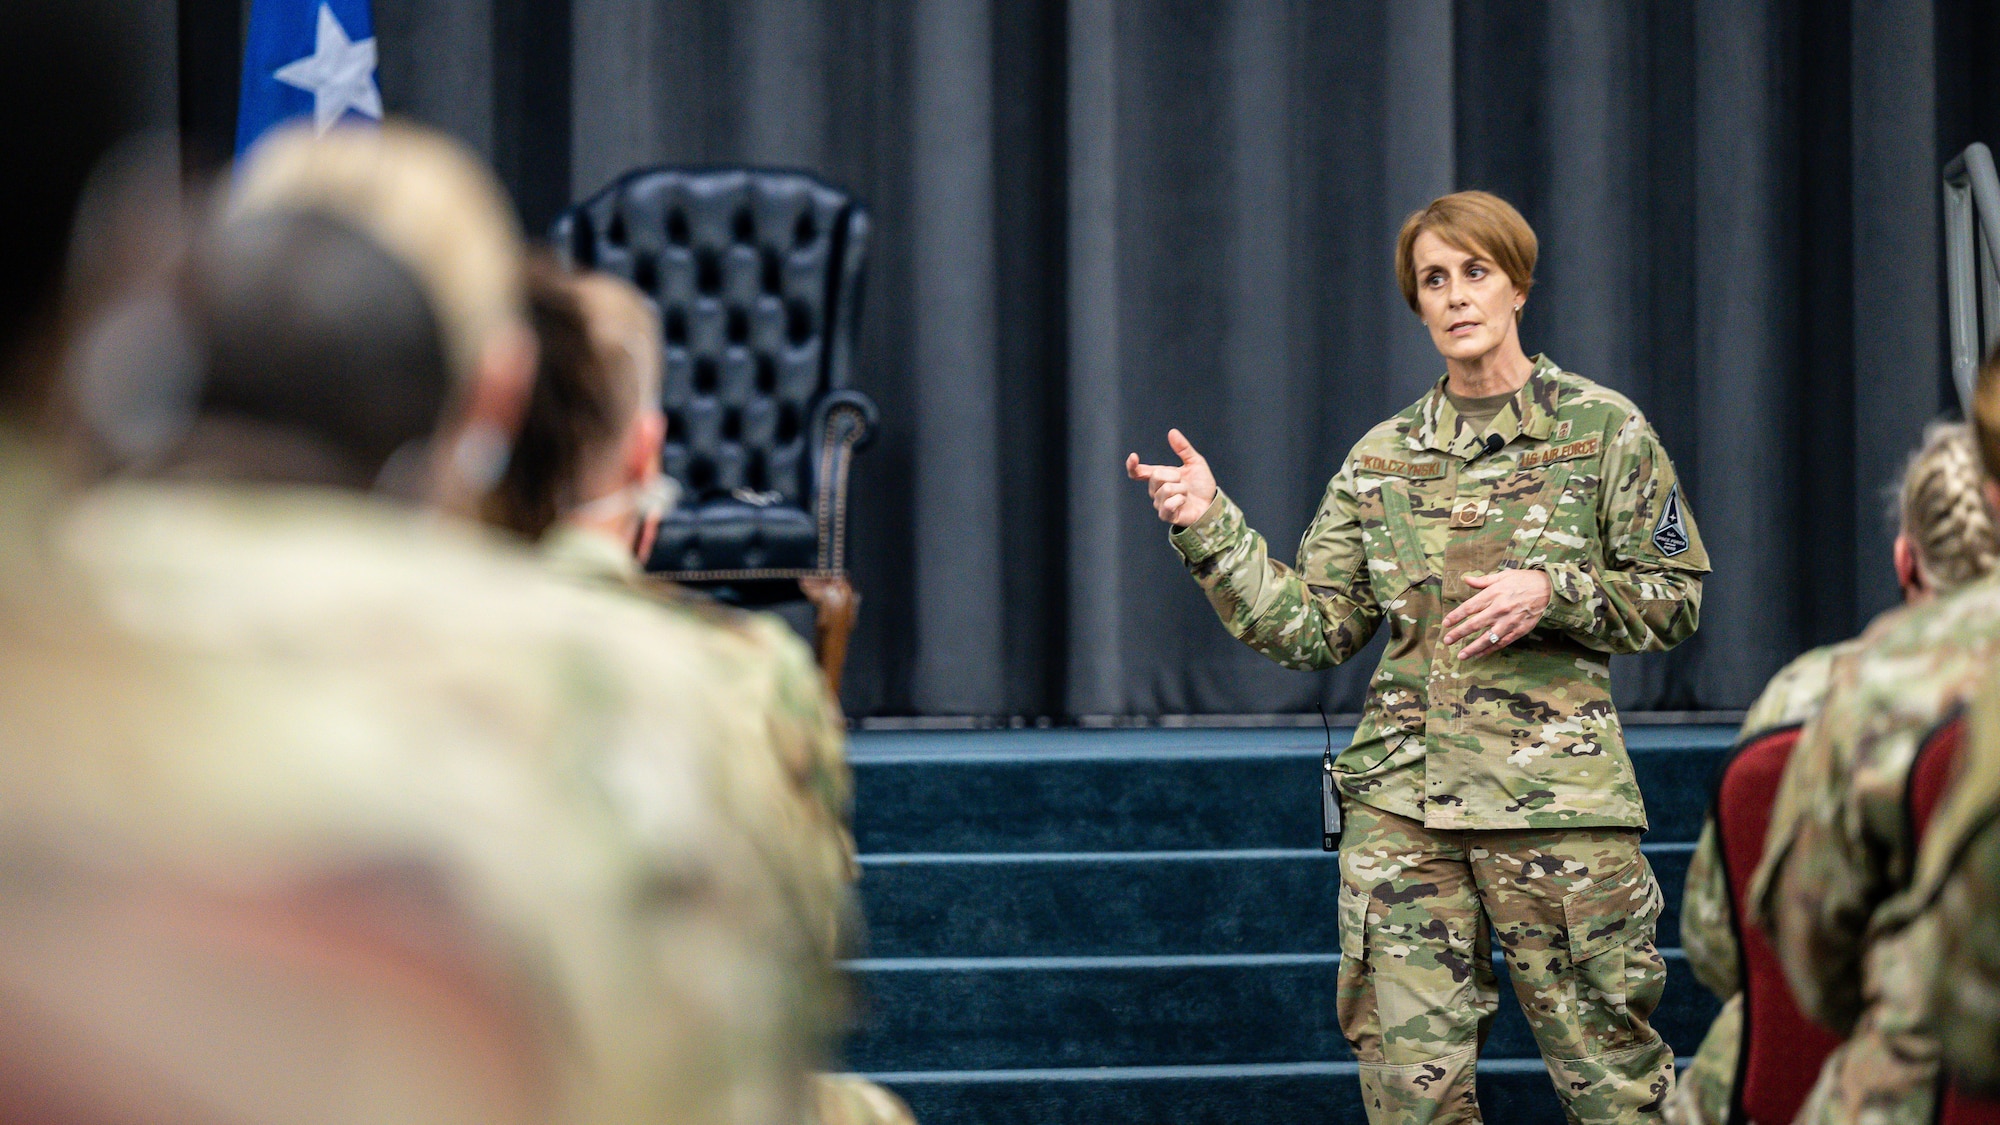 Chief Master Sgt. Dawn Kolczynski, Office of the Surgeon General medical enlisted force and enlisted corps chief, speaks during an all-call at Barksdale Air Force Base, Louisiana, March 10, 2021